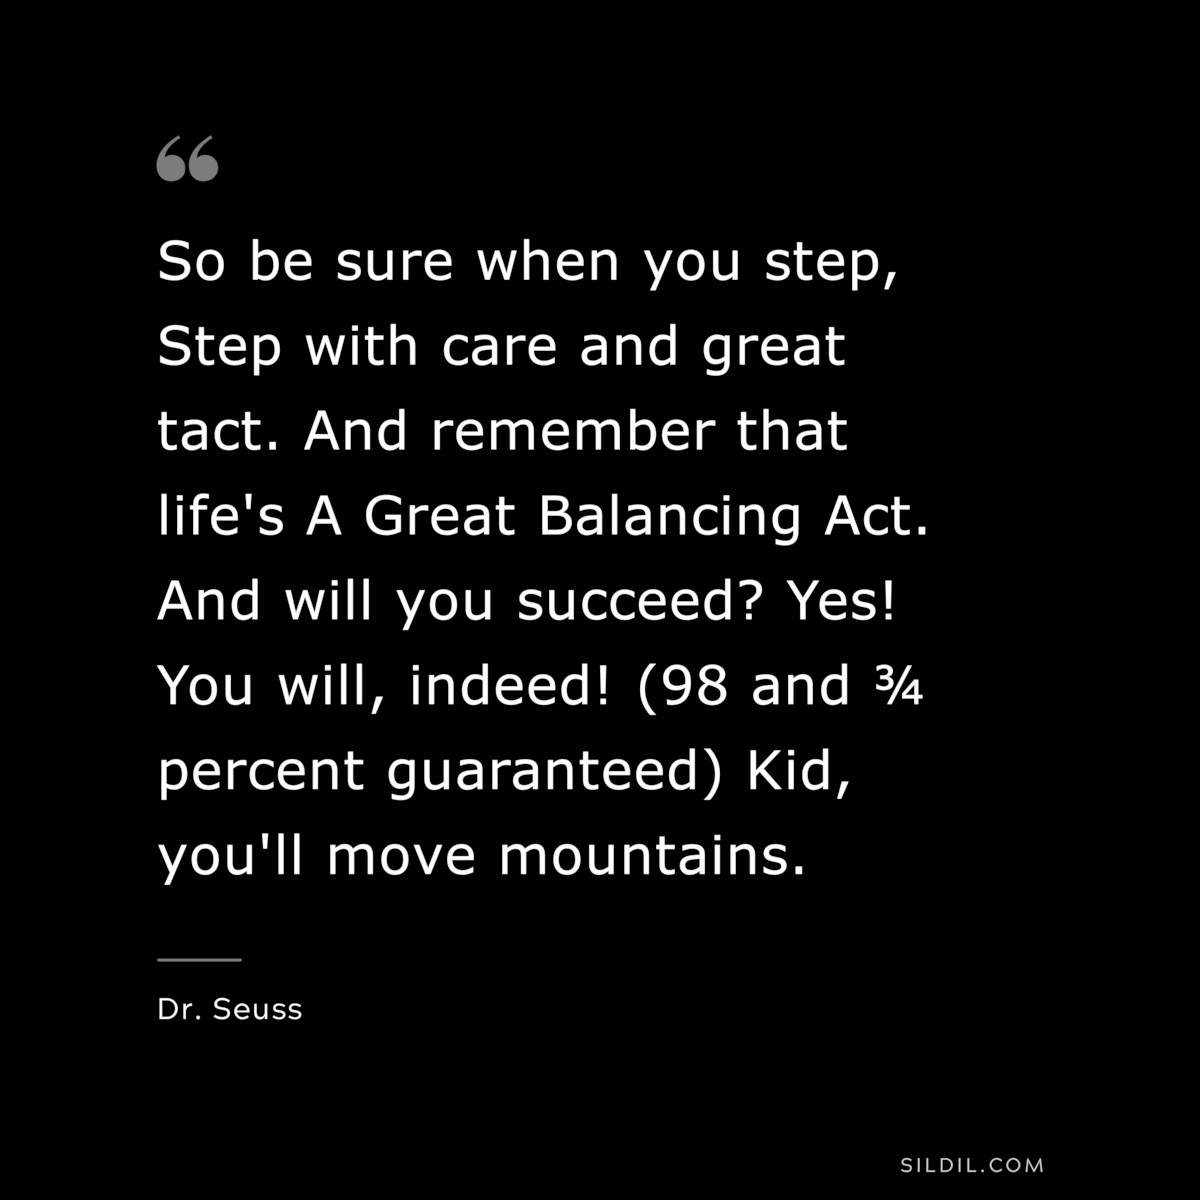 So be sure when you step, Step with care and great tact. And remember that life's A Great Balancing Act. And will you succeed? Yes! You will, indeed! (98 and ¾ percent guaranteed) Kid, you'll move mountains. ― Dr. Seuss